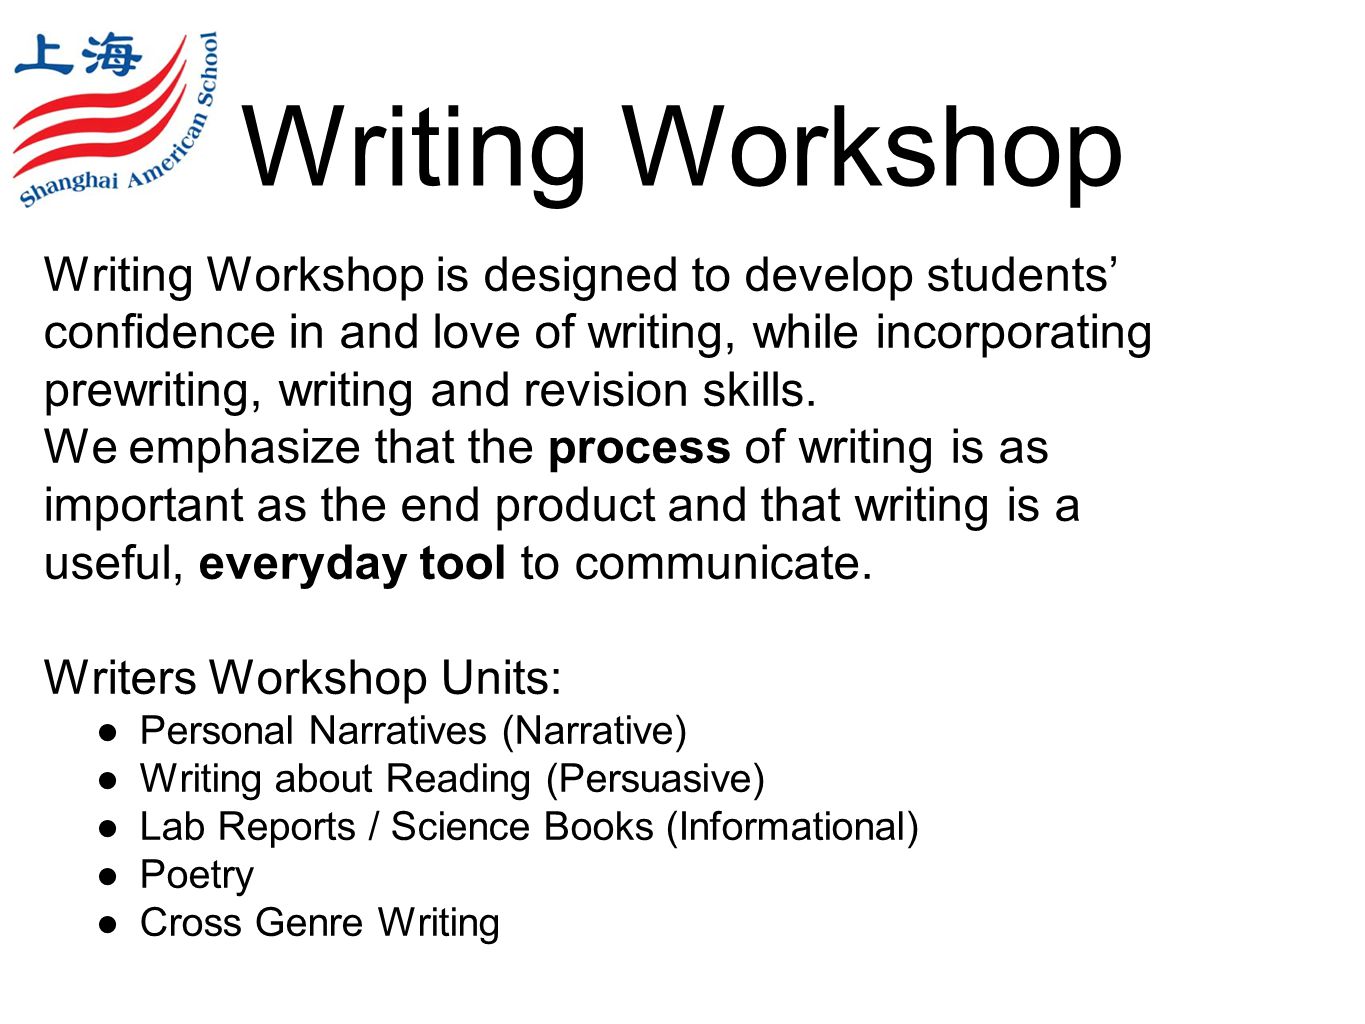 Writing Workshop Writing Workshop is designed to develop students’ confidence in and love of writing, while incorporating prewriting, writing and revision skills.